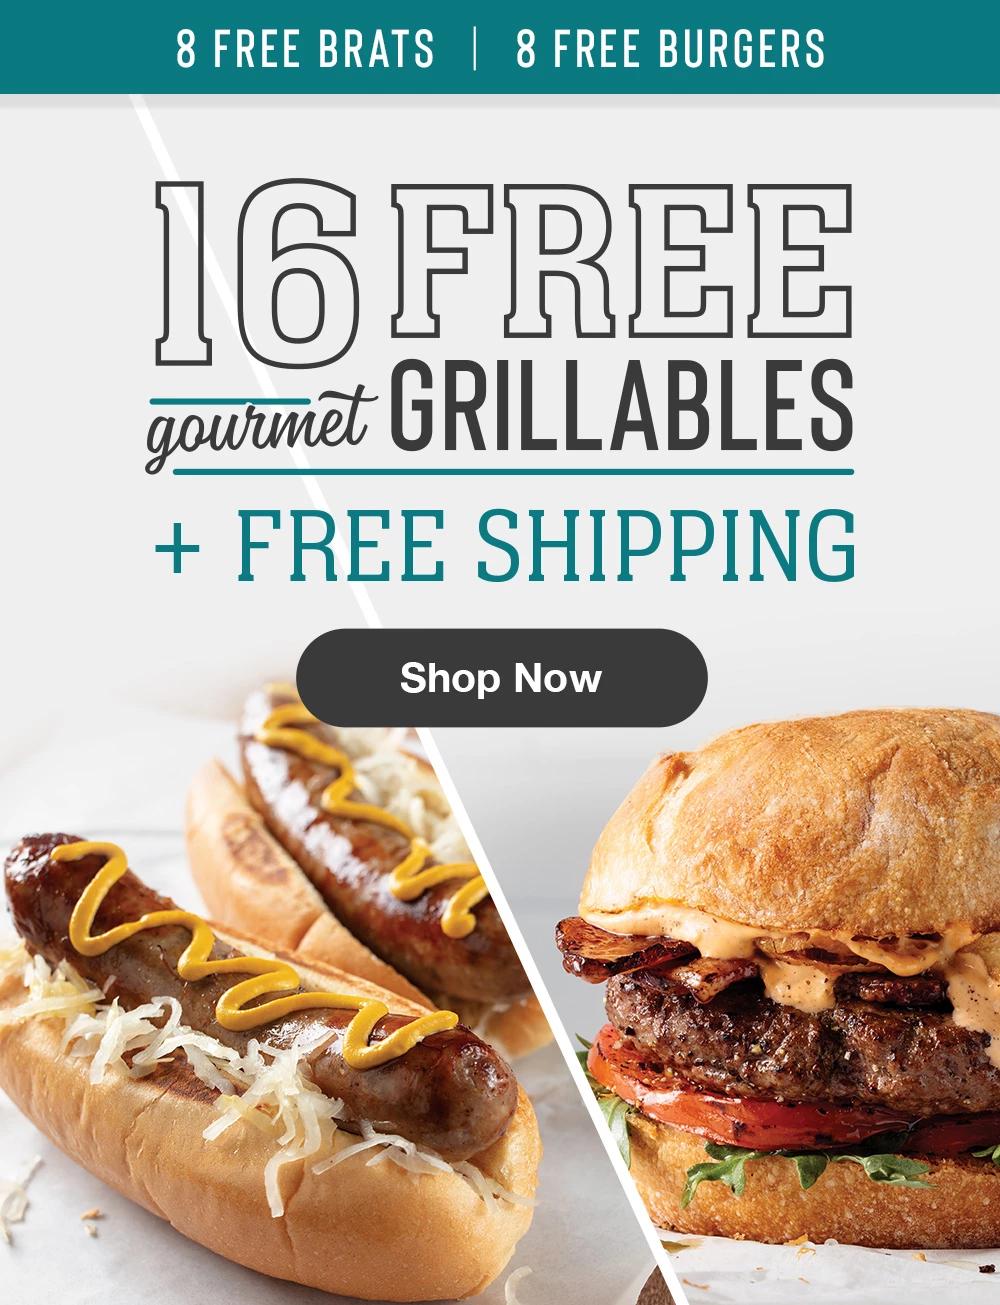 8 FREE BRATS | 8 FREE BURGERS | 16 FREE gourmet GRILLABLES + FREE SHIPPING || Shop Now